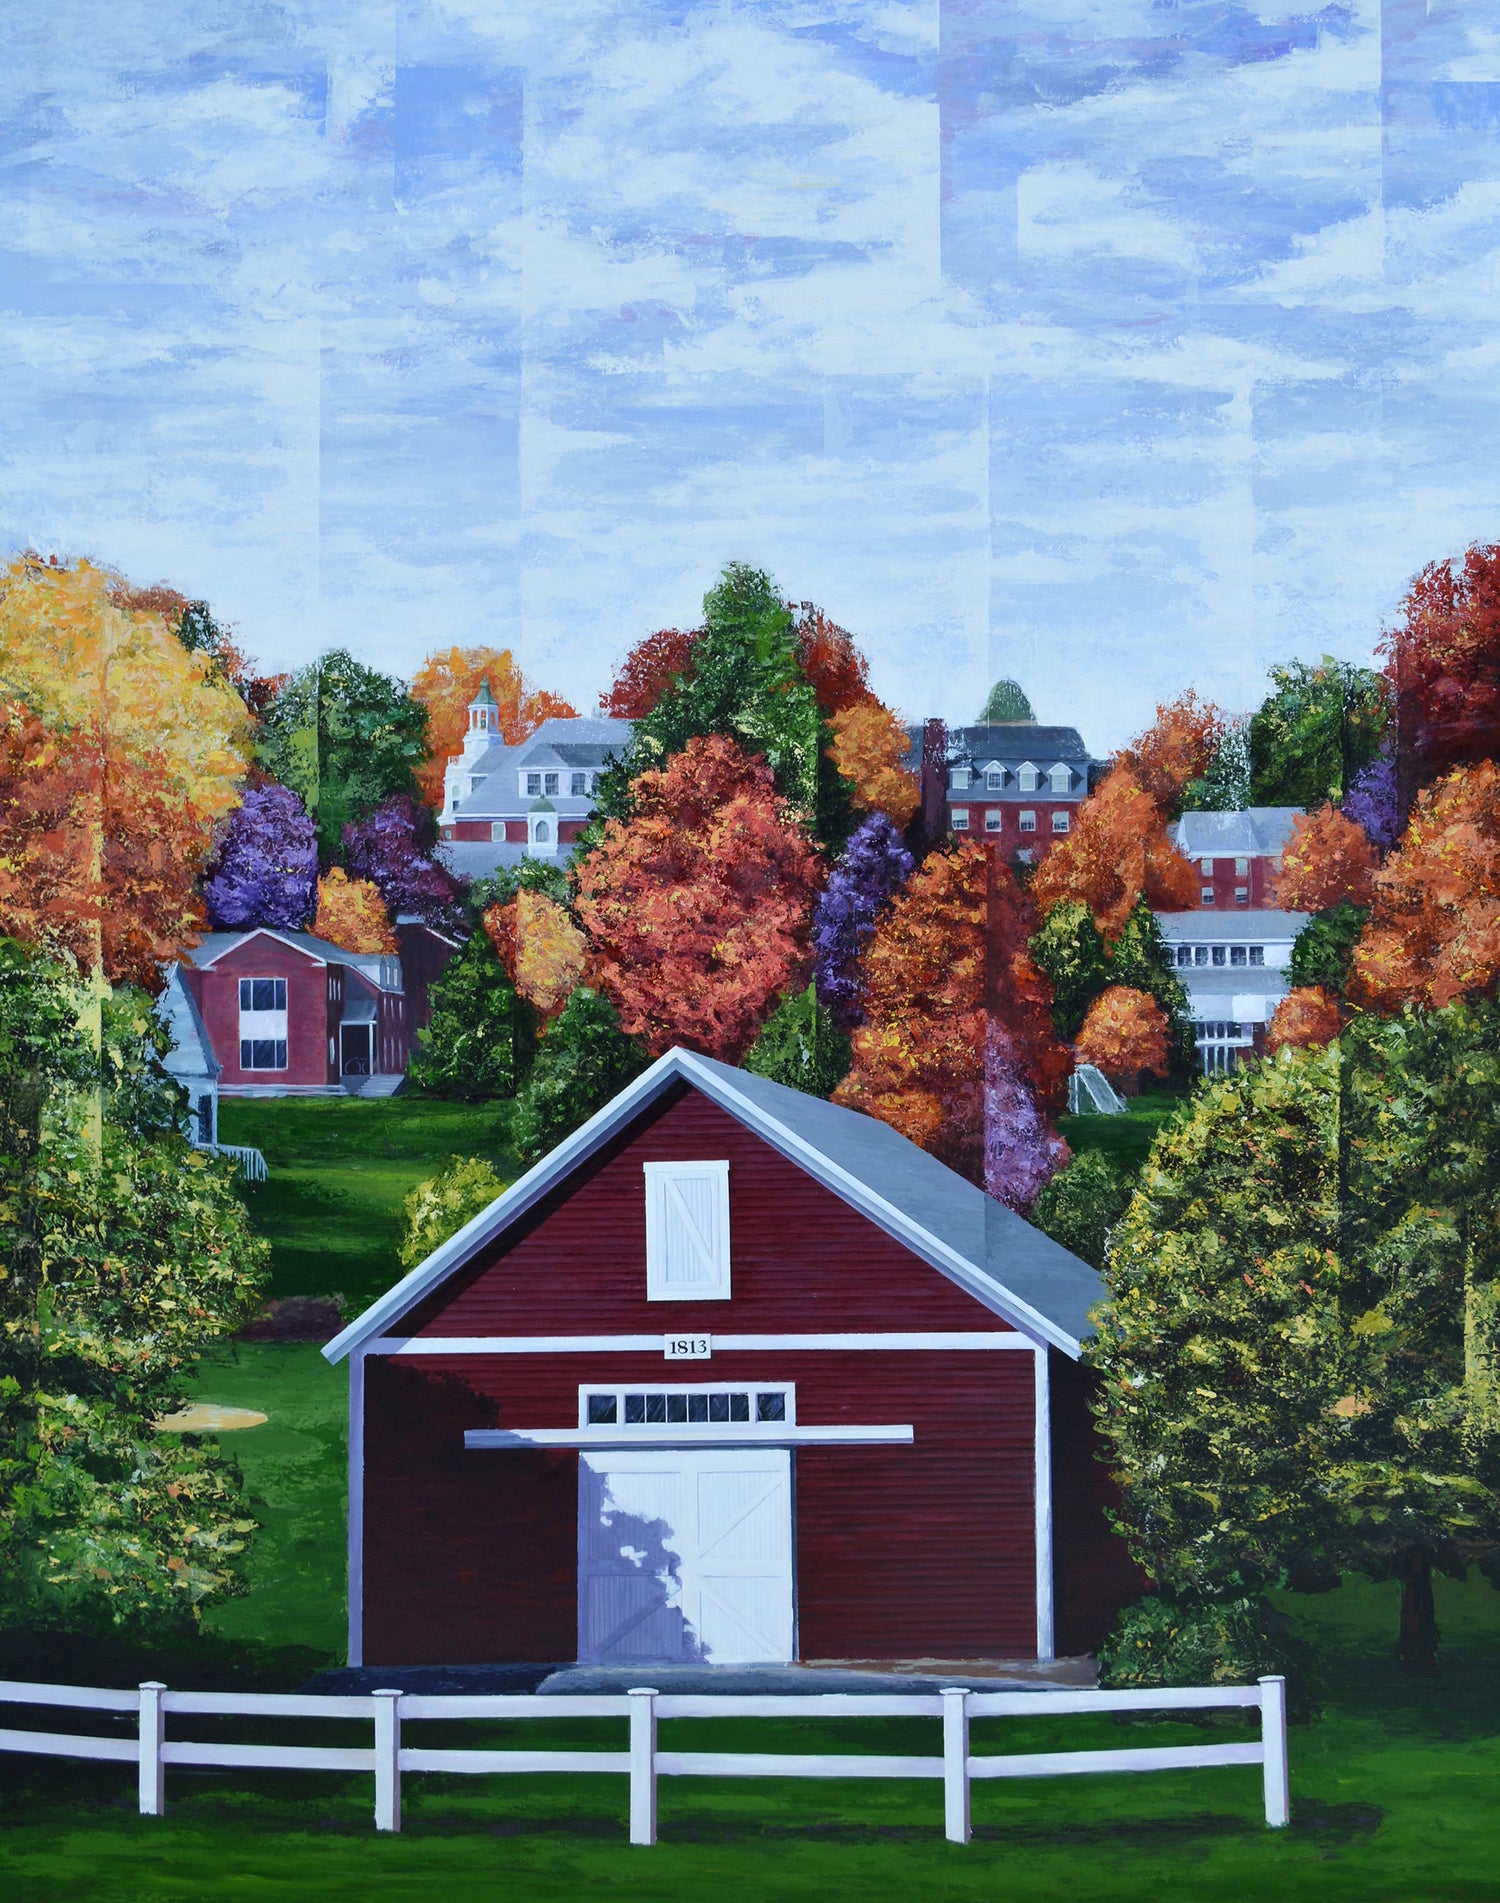 Painting of Kimball Barn located at Kimball Union Academy in Meriden NH with the school campus in the background on the hilltop